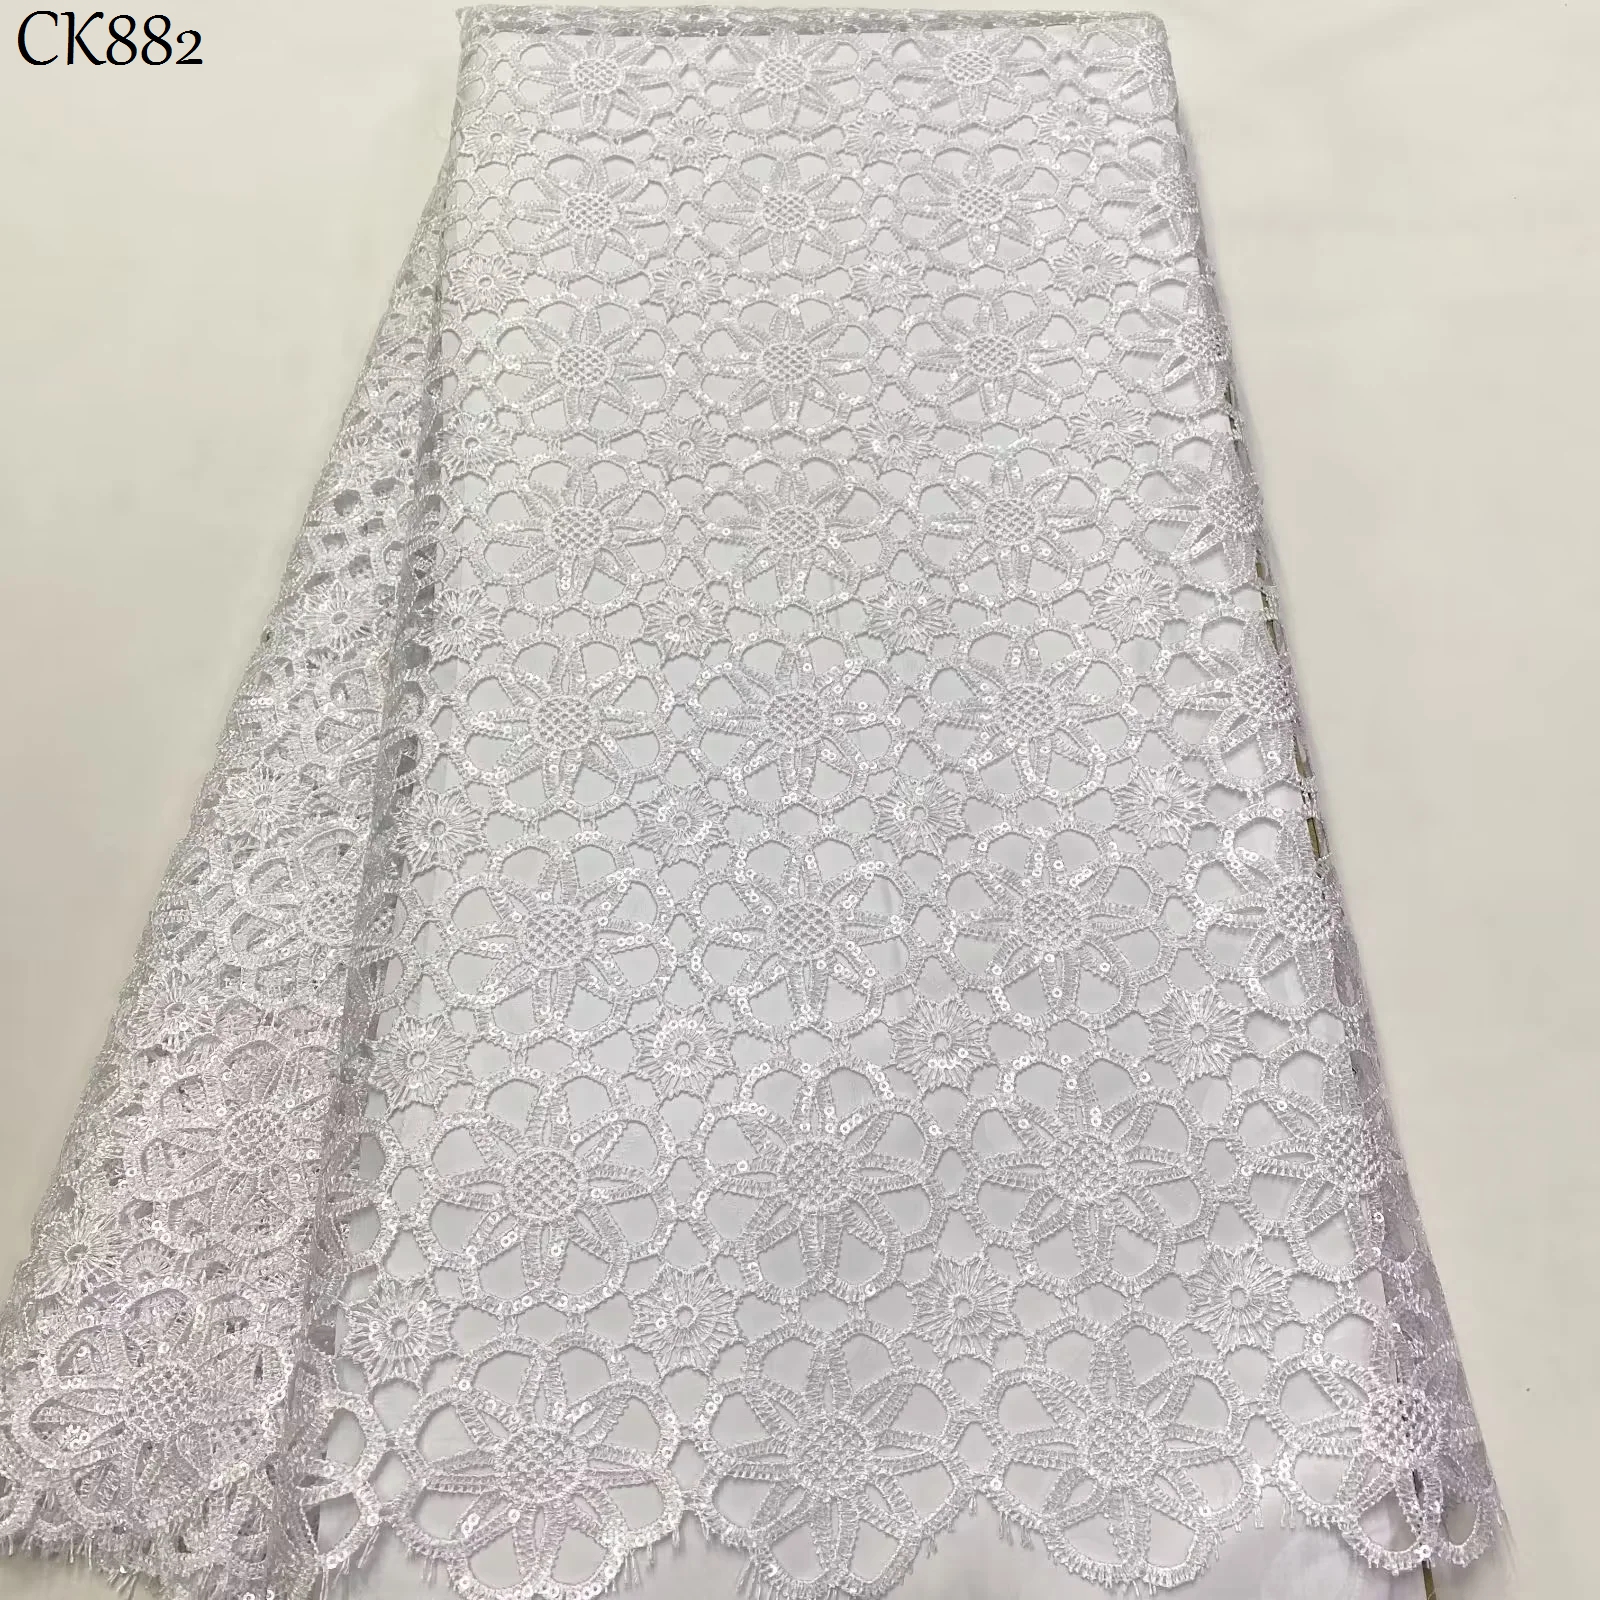 Latest Cord Lace African French Net Lace Bridal Pinted Lace Wedding Gown Material For Party Dress